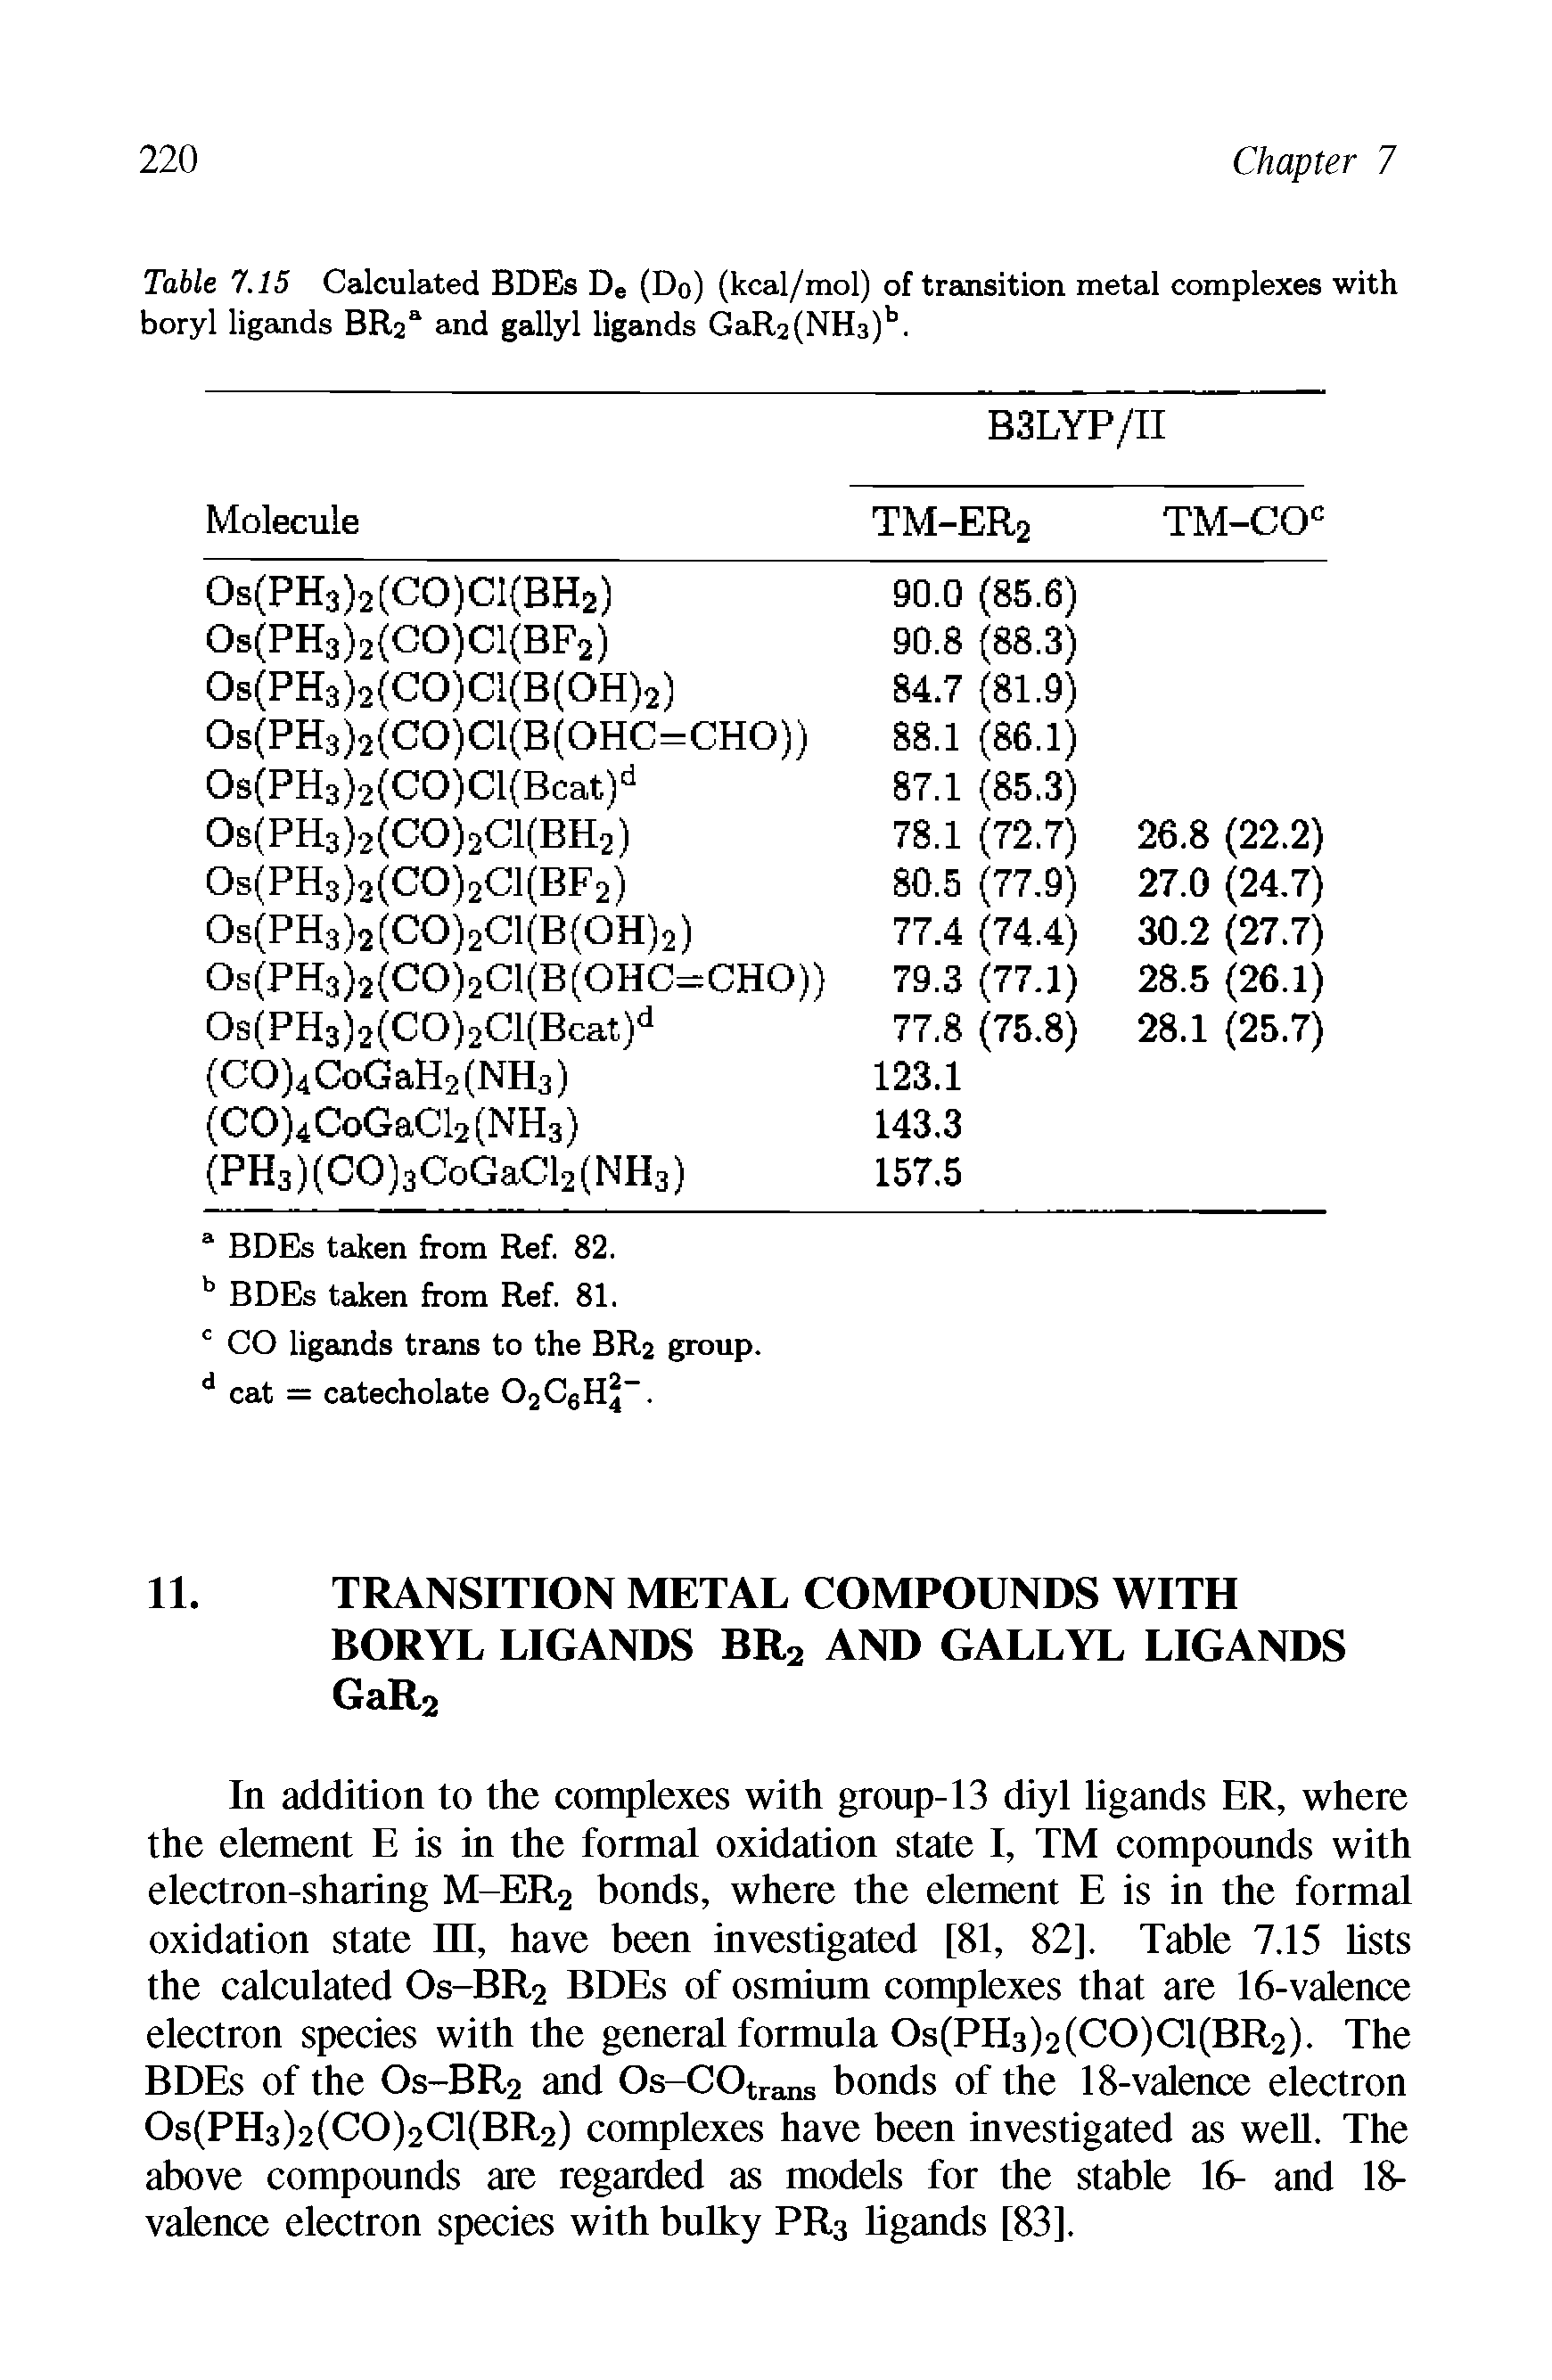 Table 7.15 Calculated BDEs De (Do) (kcal/mol) of transition metal complexes with boryl ligands BR2a and gallyl ligands GaR2(NH3)b.